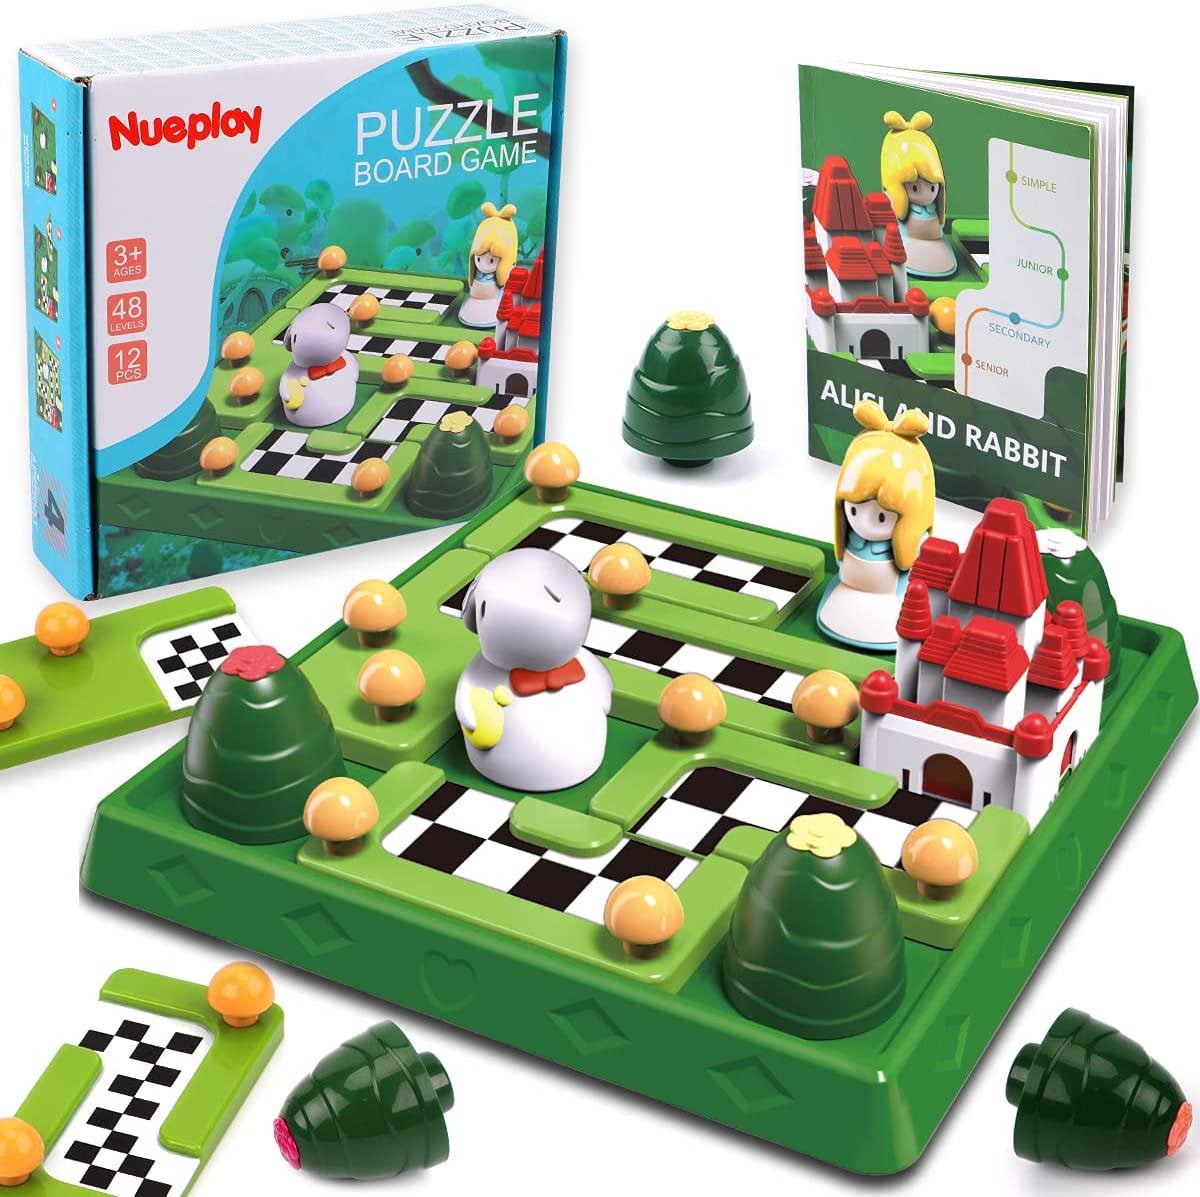 Nueplay Creative Logical Board Game, Early STEM Educational Challenge